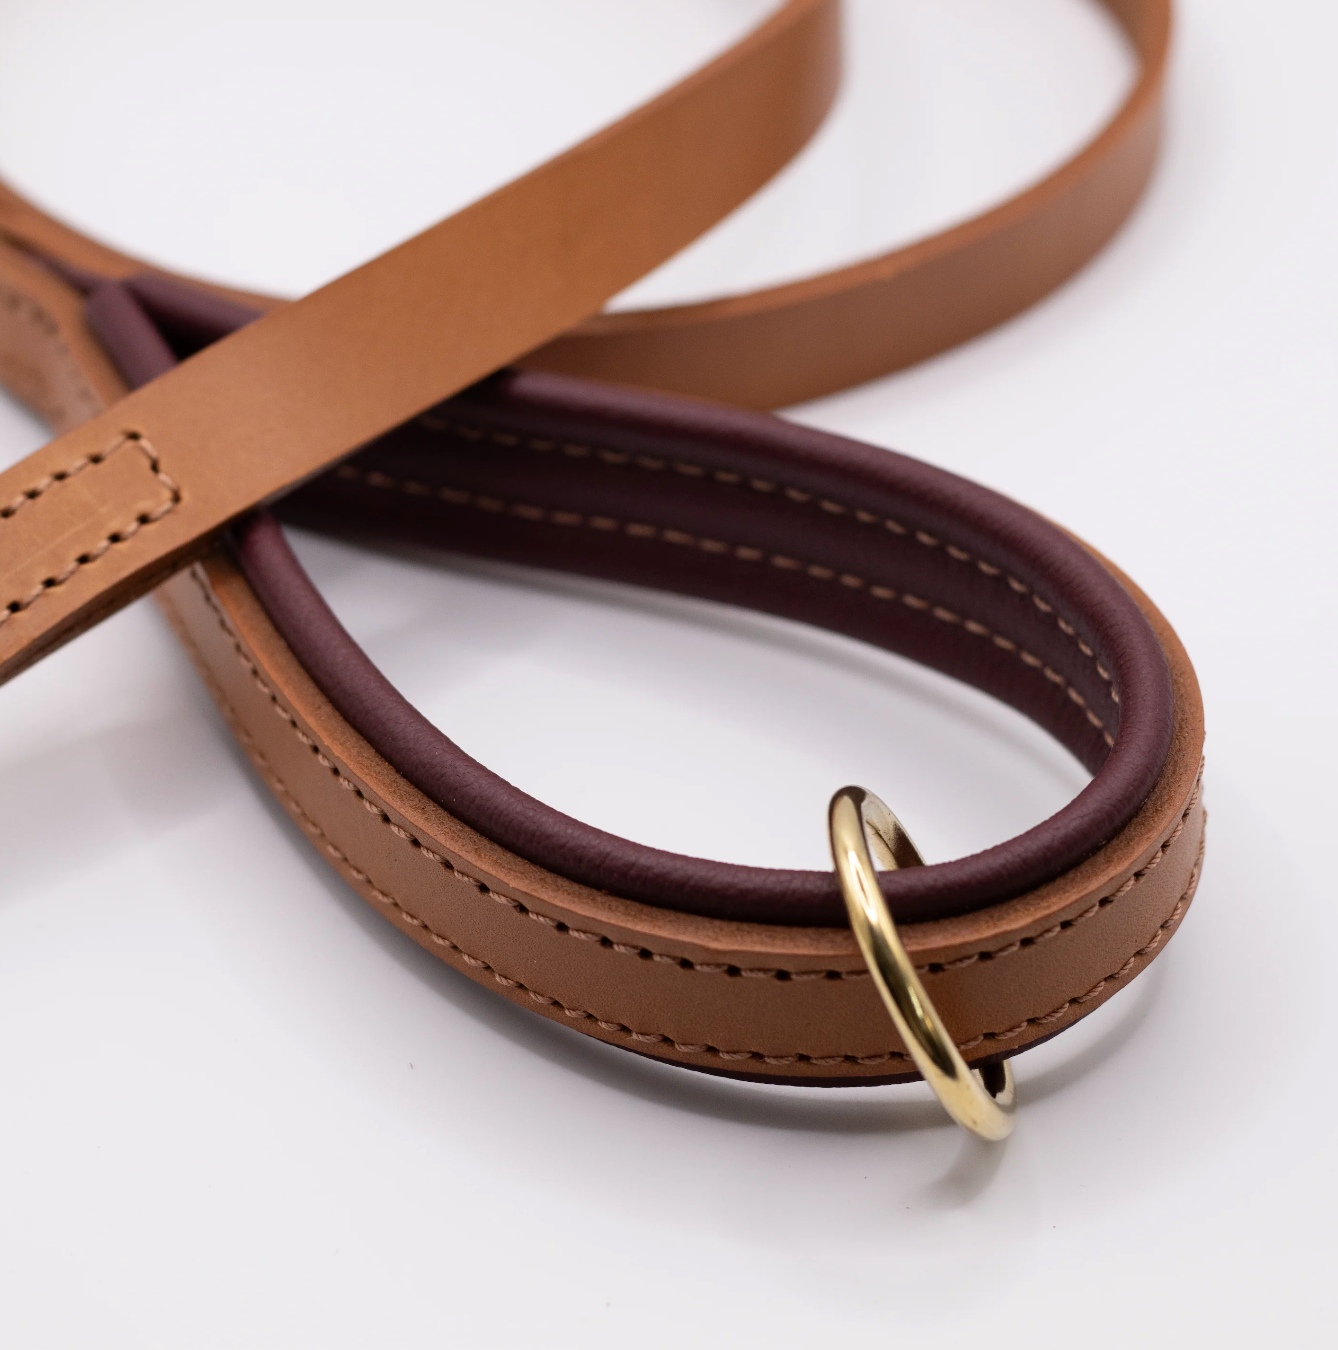 Padded Leather Dog Lead Tan and Merlot